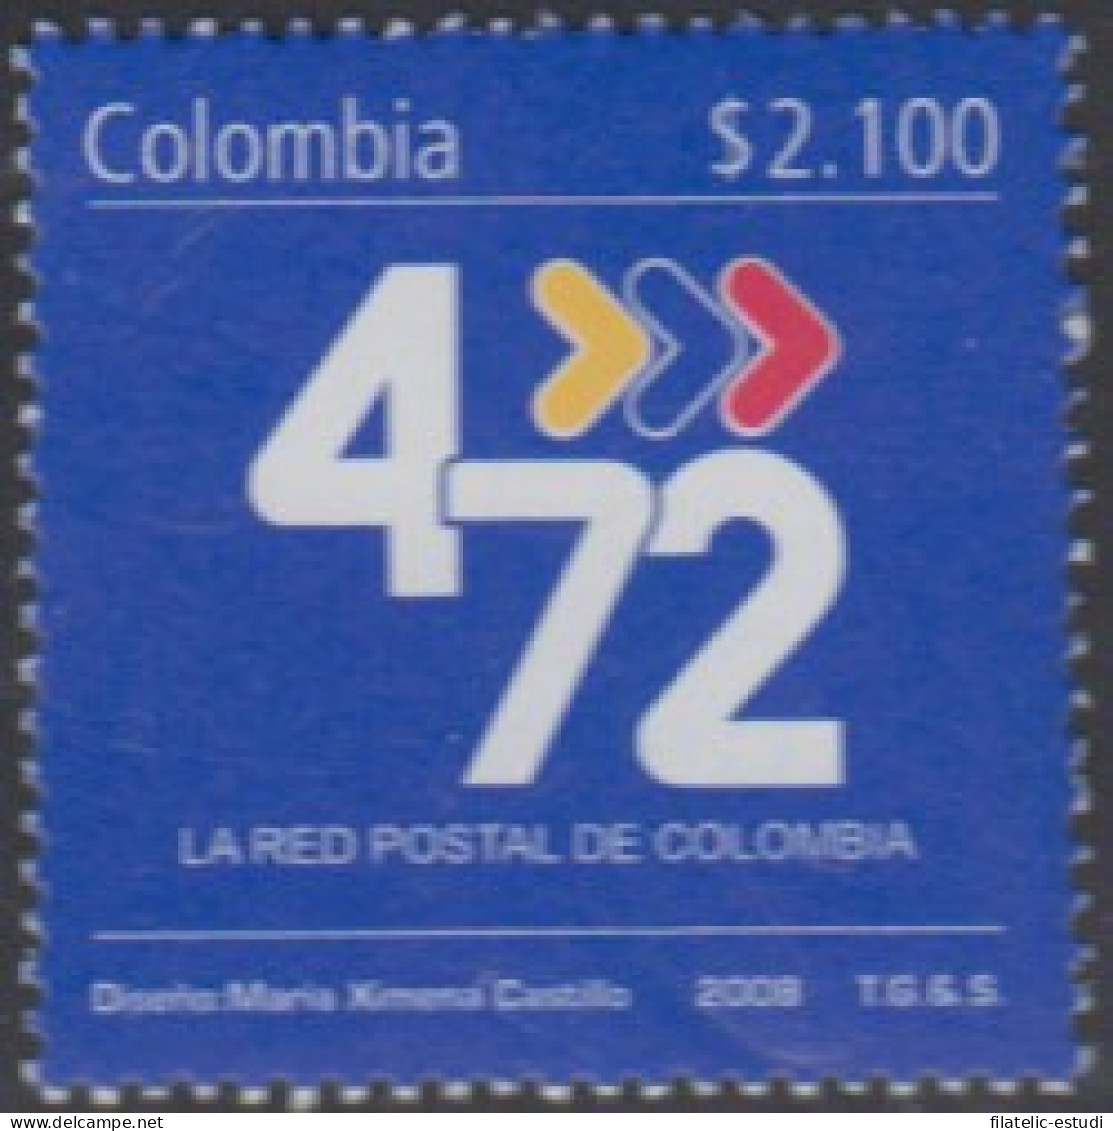 Colombia 1425 2008 4-72 Red Postal De Colombia MNH - Colombia